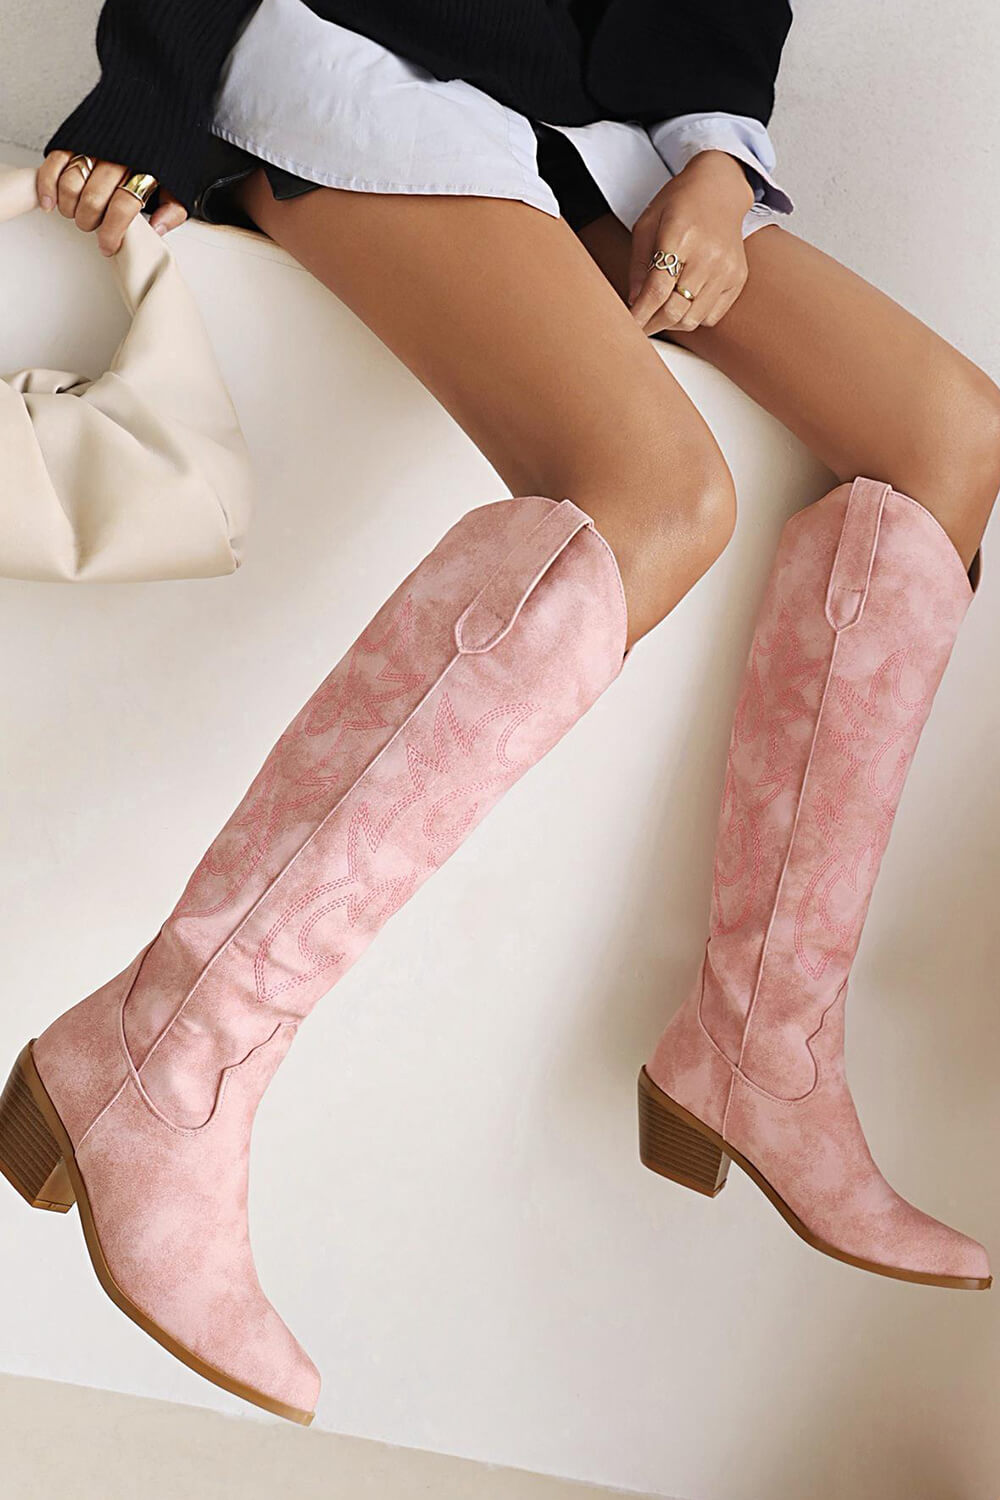 Suede Western Cowboy Almond Toe Knee High Block Heeled Boots - Pink